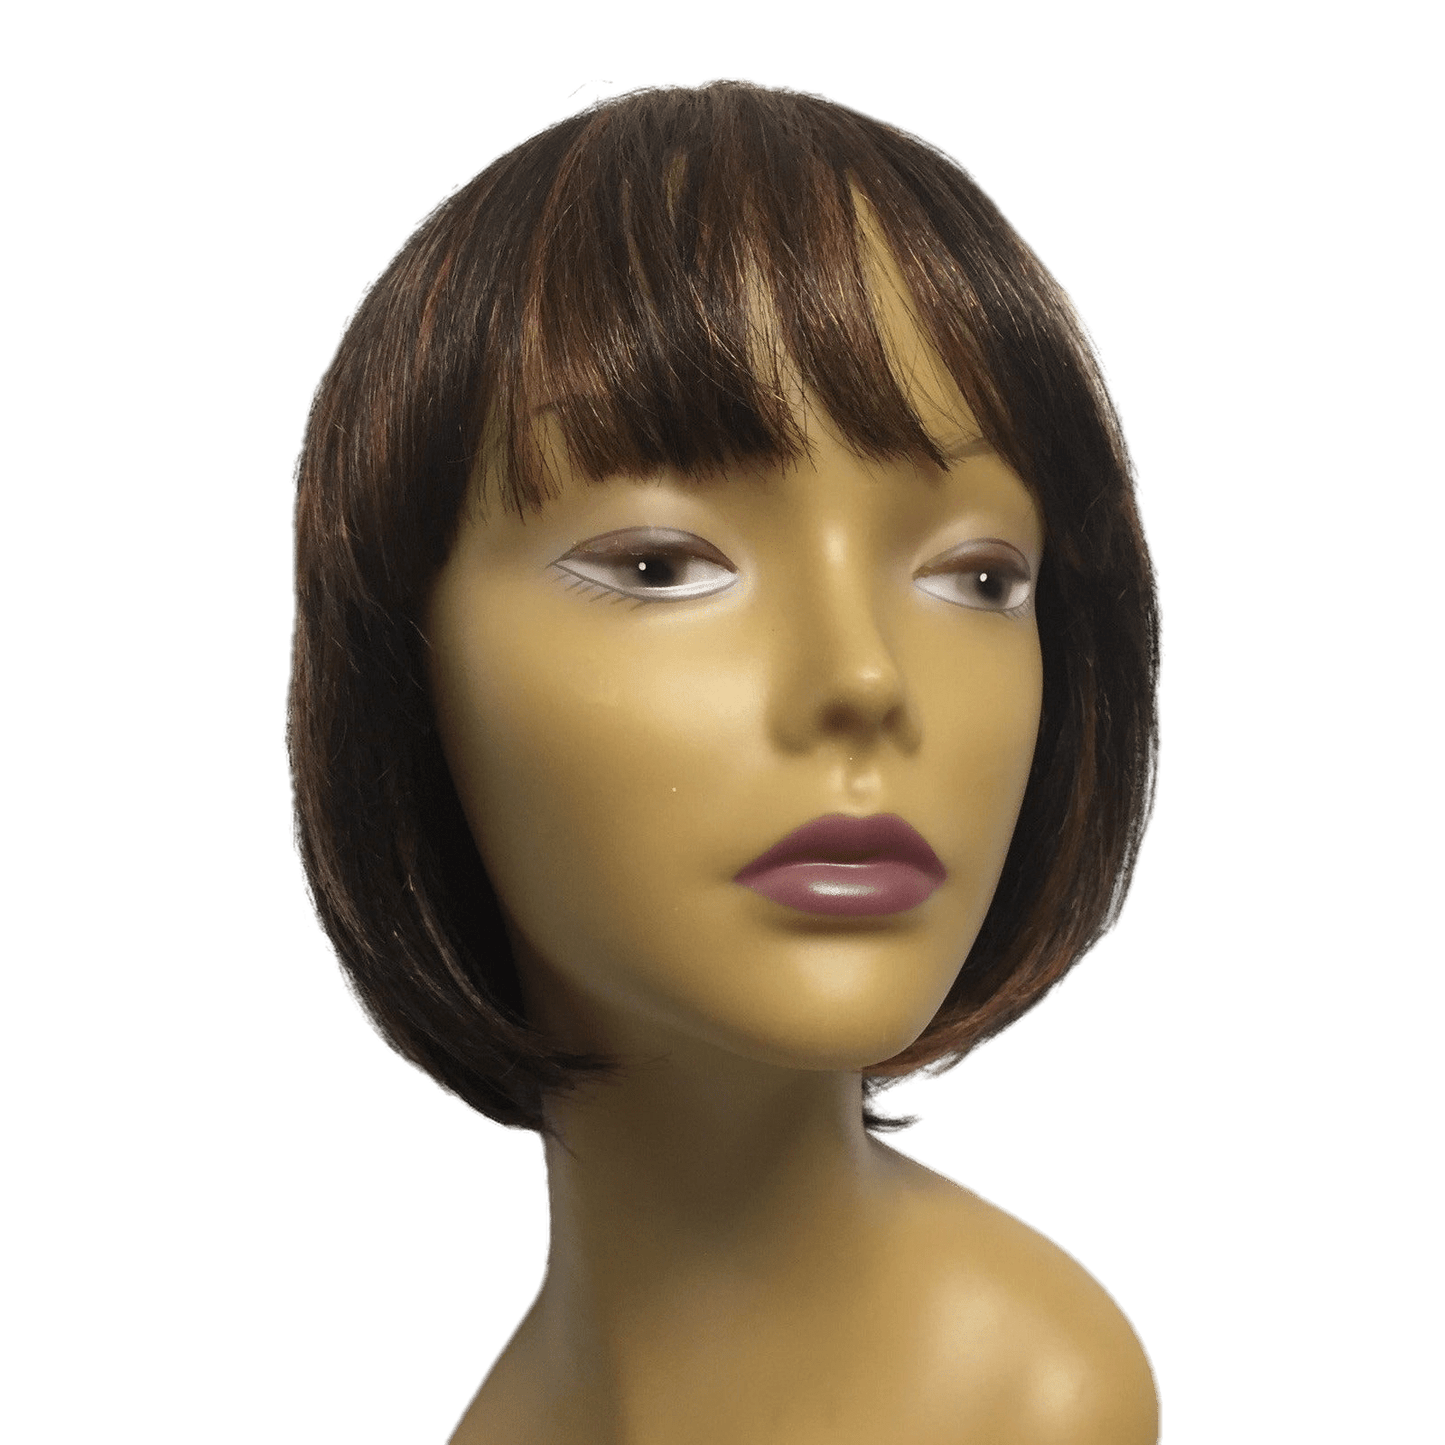 Unique's 100% Human Hair Full Wig / Style "B2" - VIP Extensions